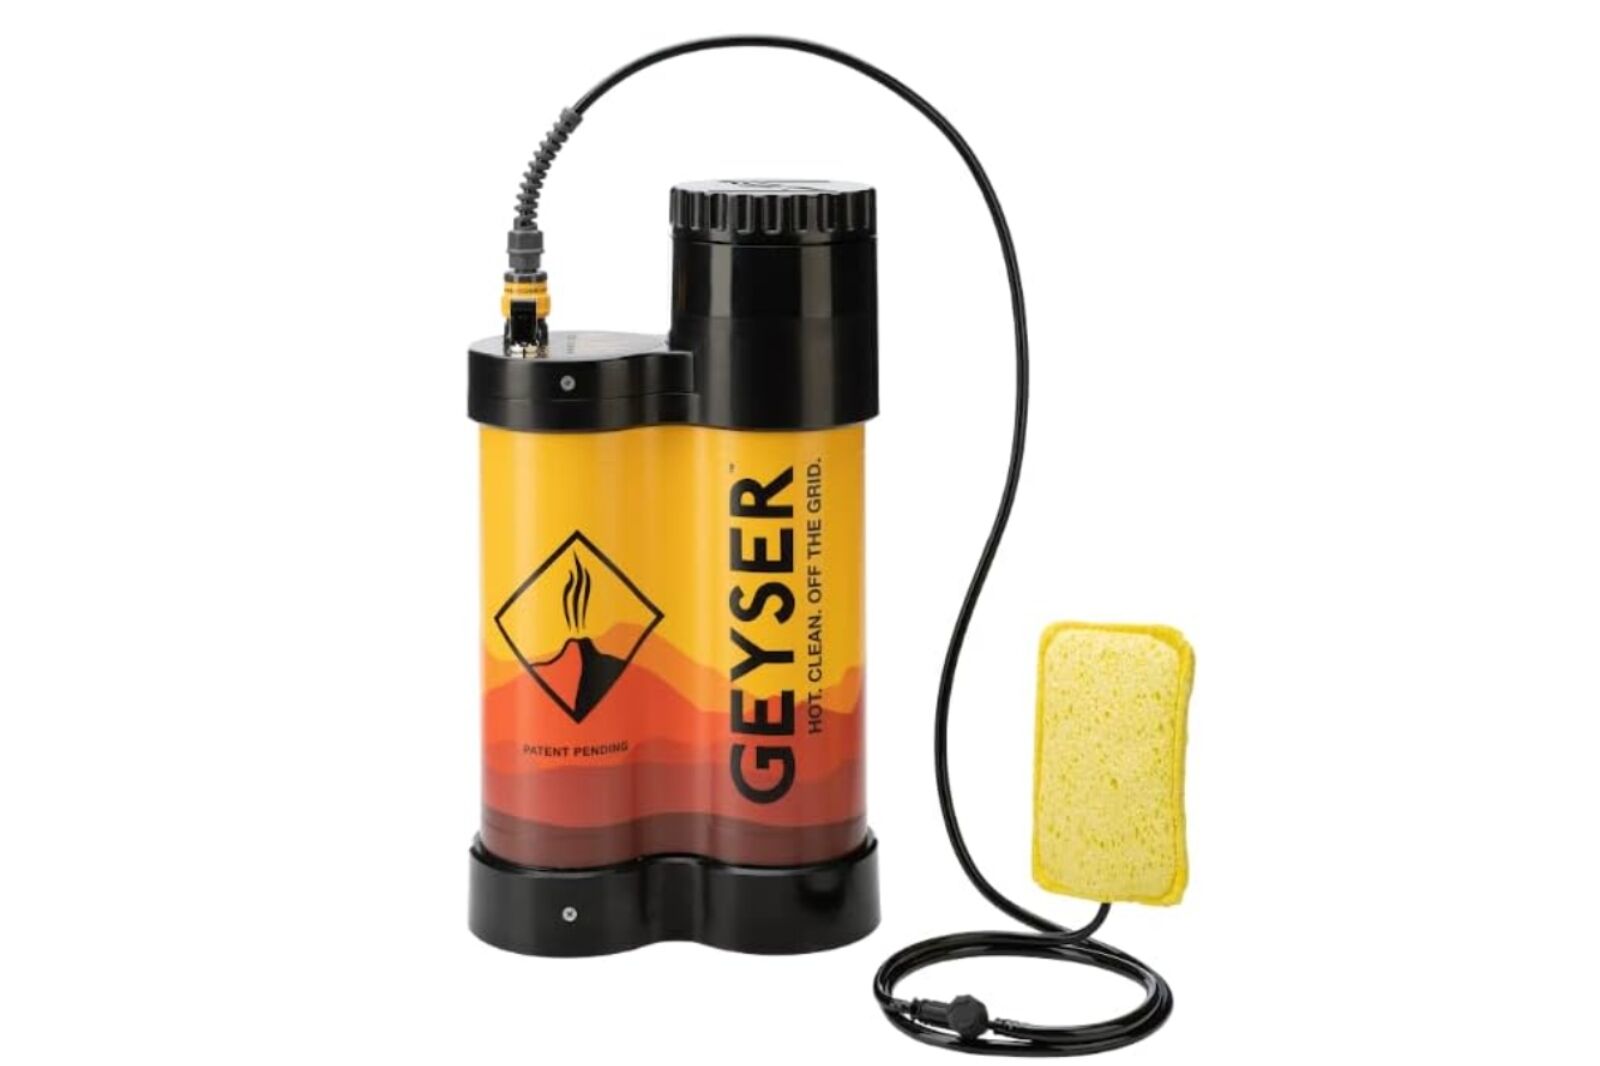 Geyser Portable Shower, Cleaning Kit, and Electric Heater